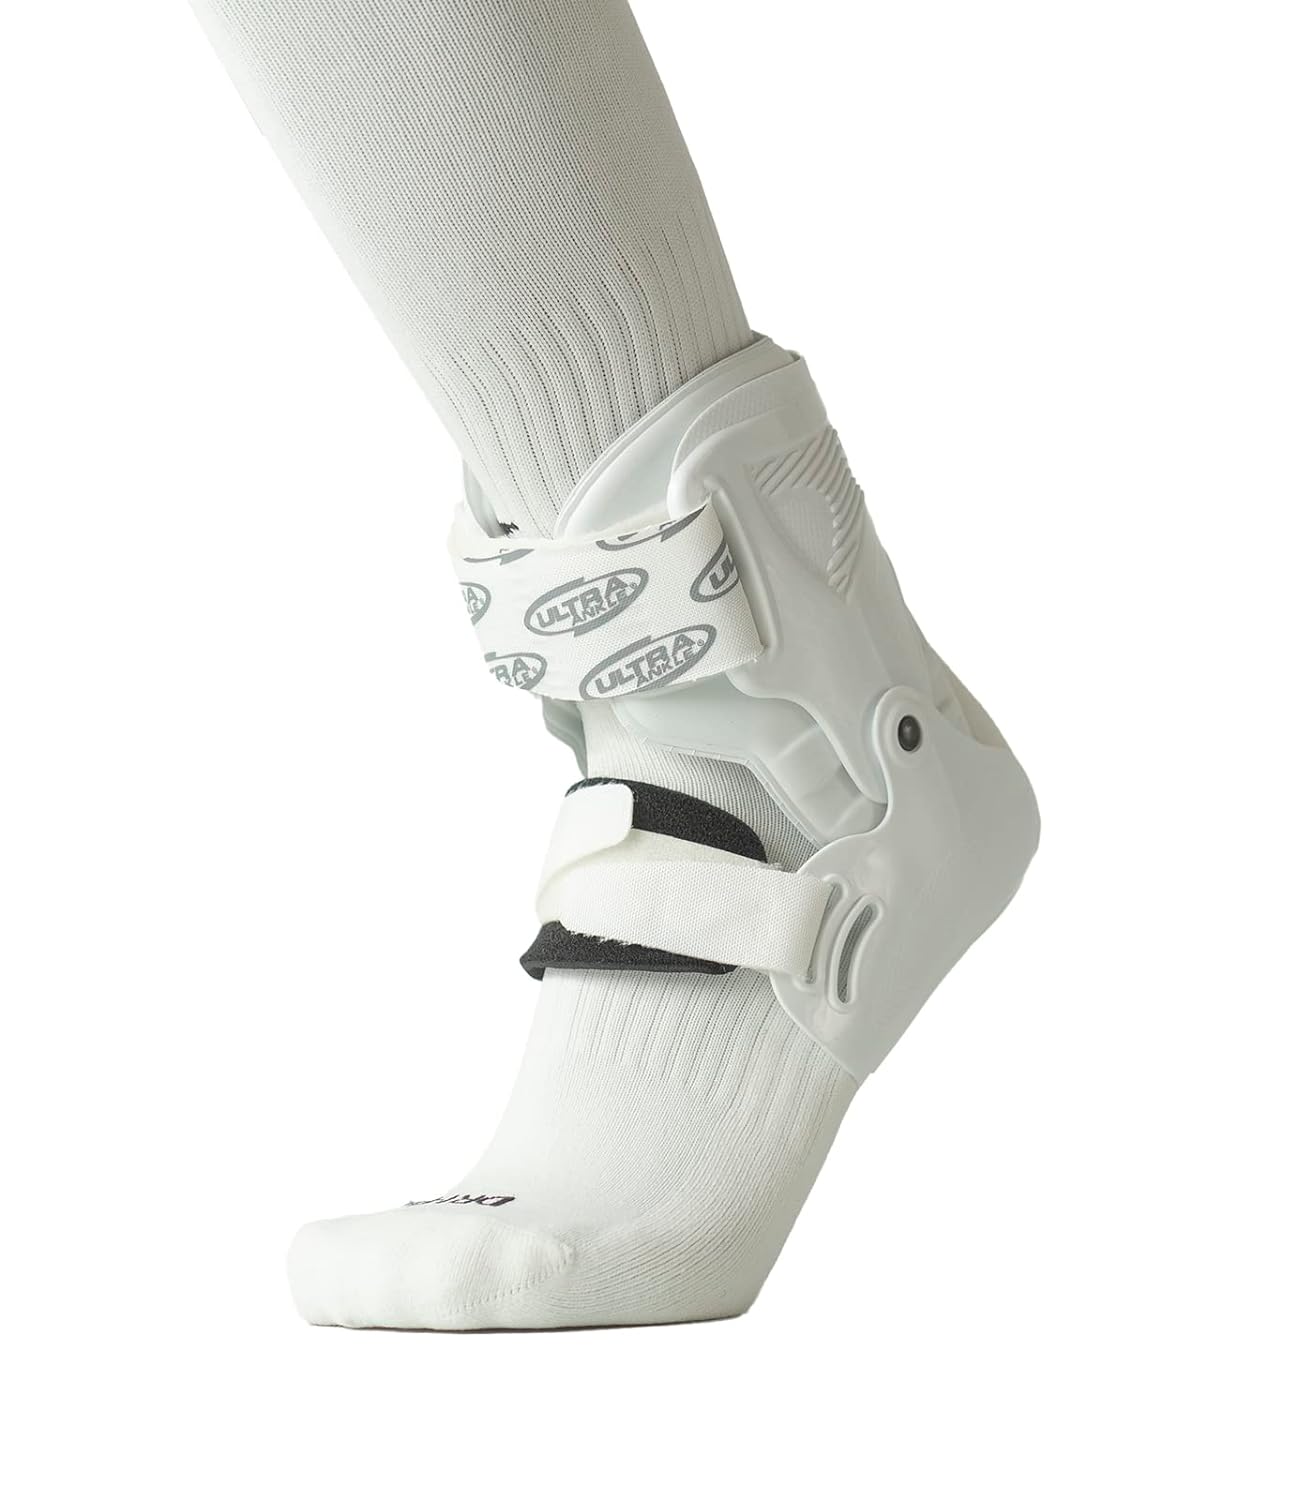 Ultra Zoom® Ankle Brace Review